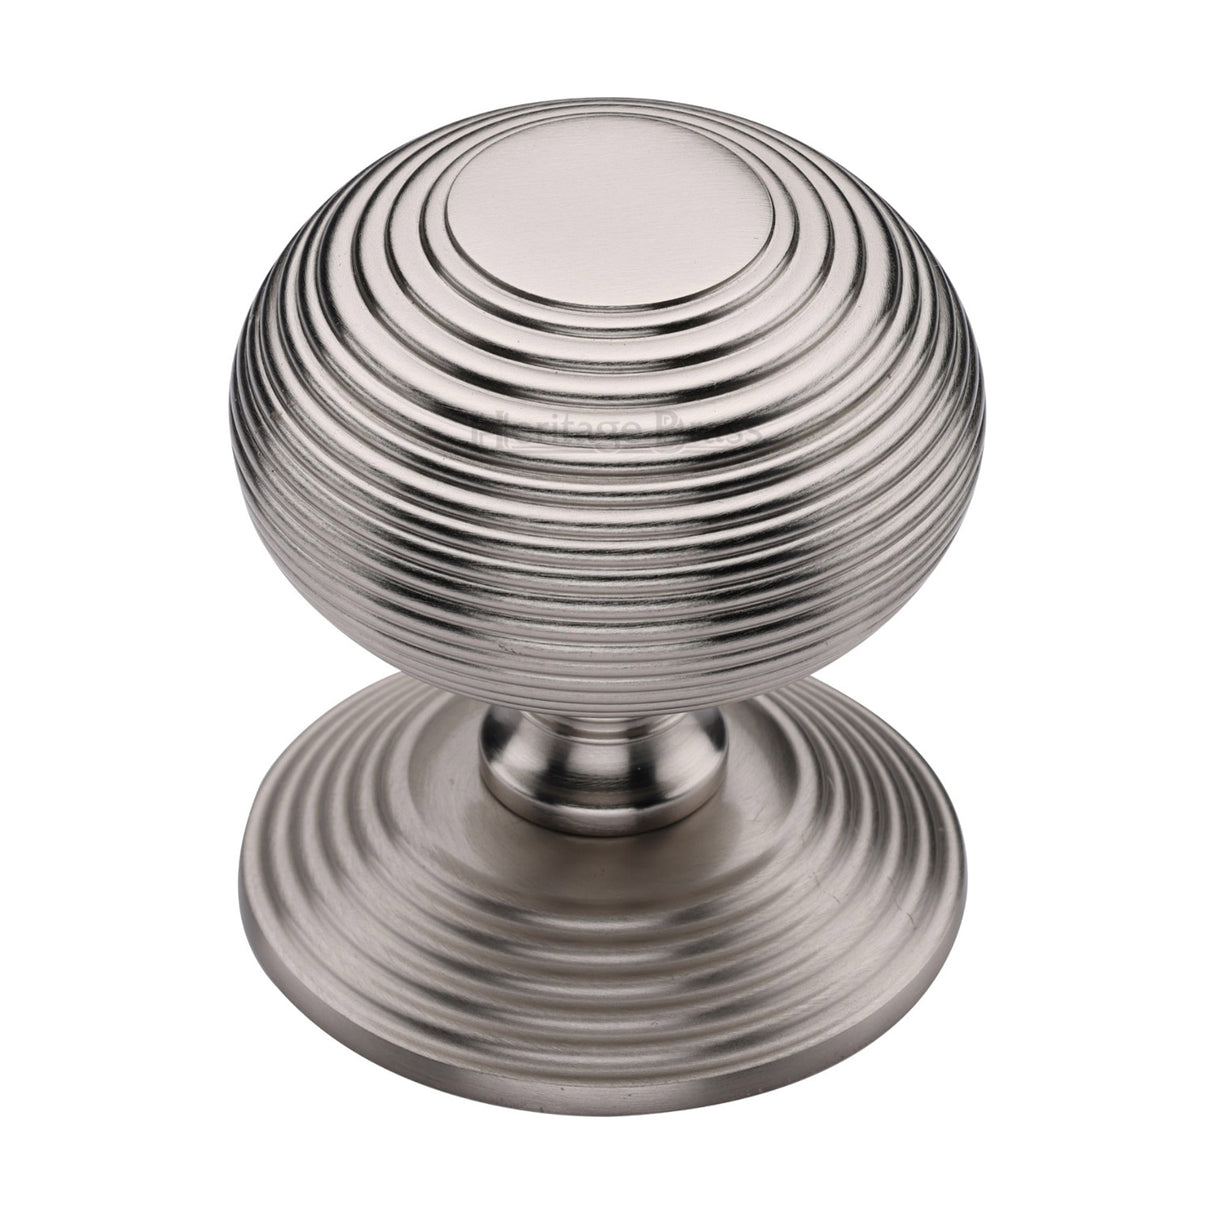 This is an image of a Heritage Brass - Centre Door Knob Reeded Design 3 1/2 Satin Nickel Finish, rr906-sn that is available to order from Trade Door Handles in Kendal.